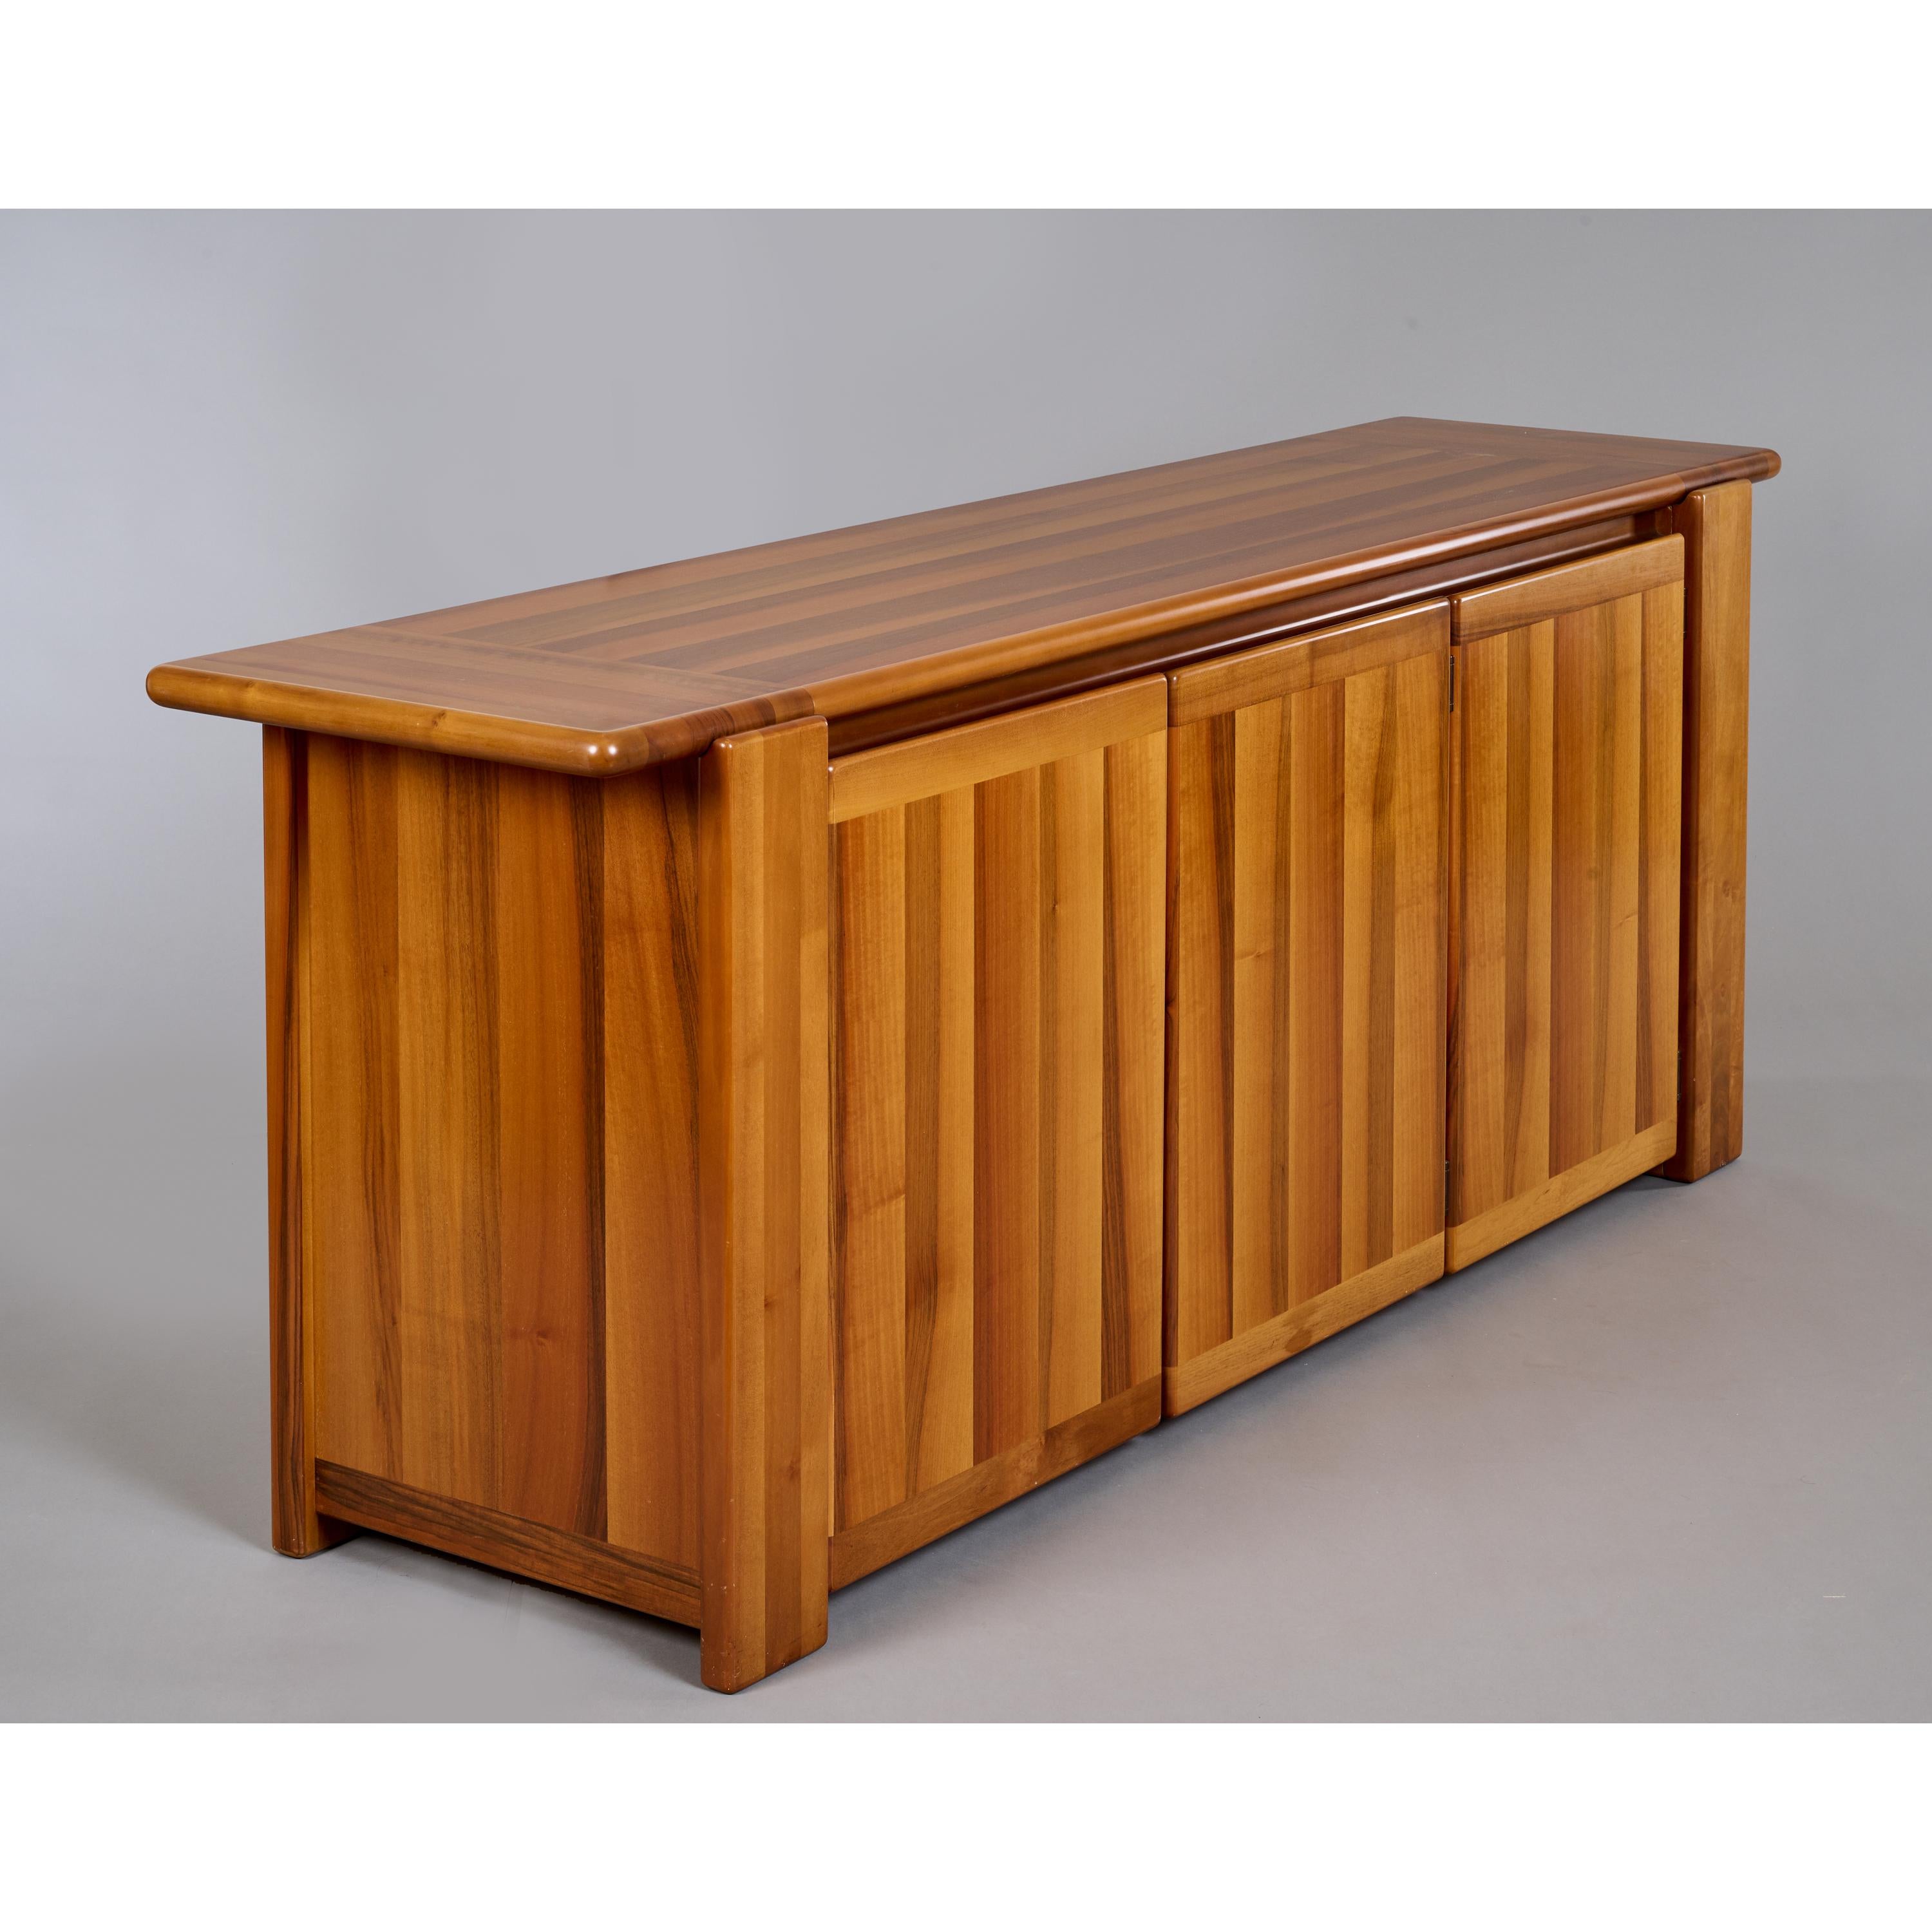 Italian Cabinet in Polished Walnut, Itso Pierre Chapo, Italy 1970s For Sale 6